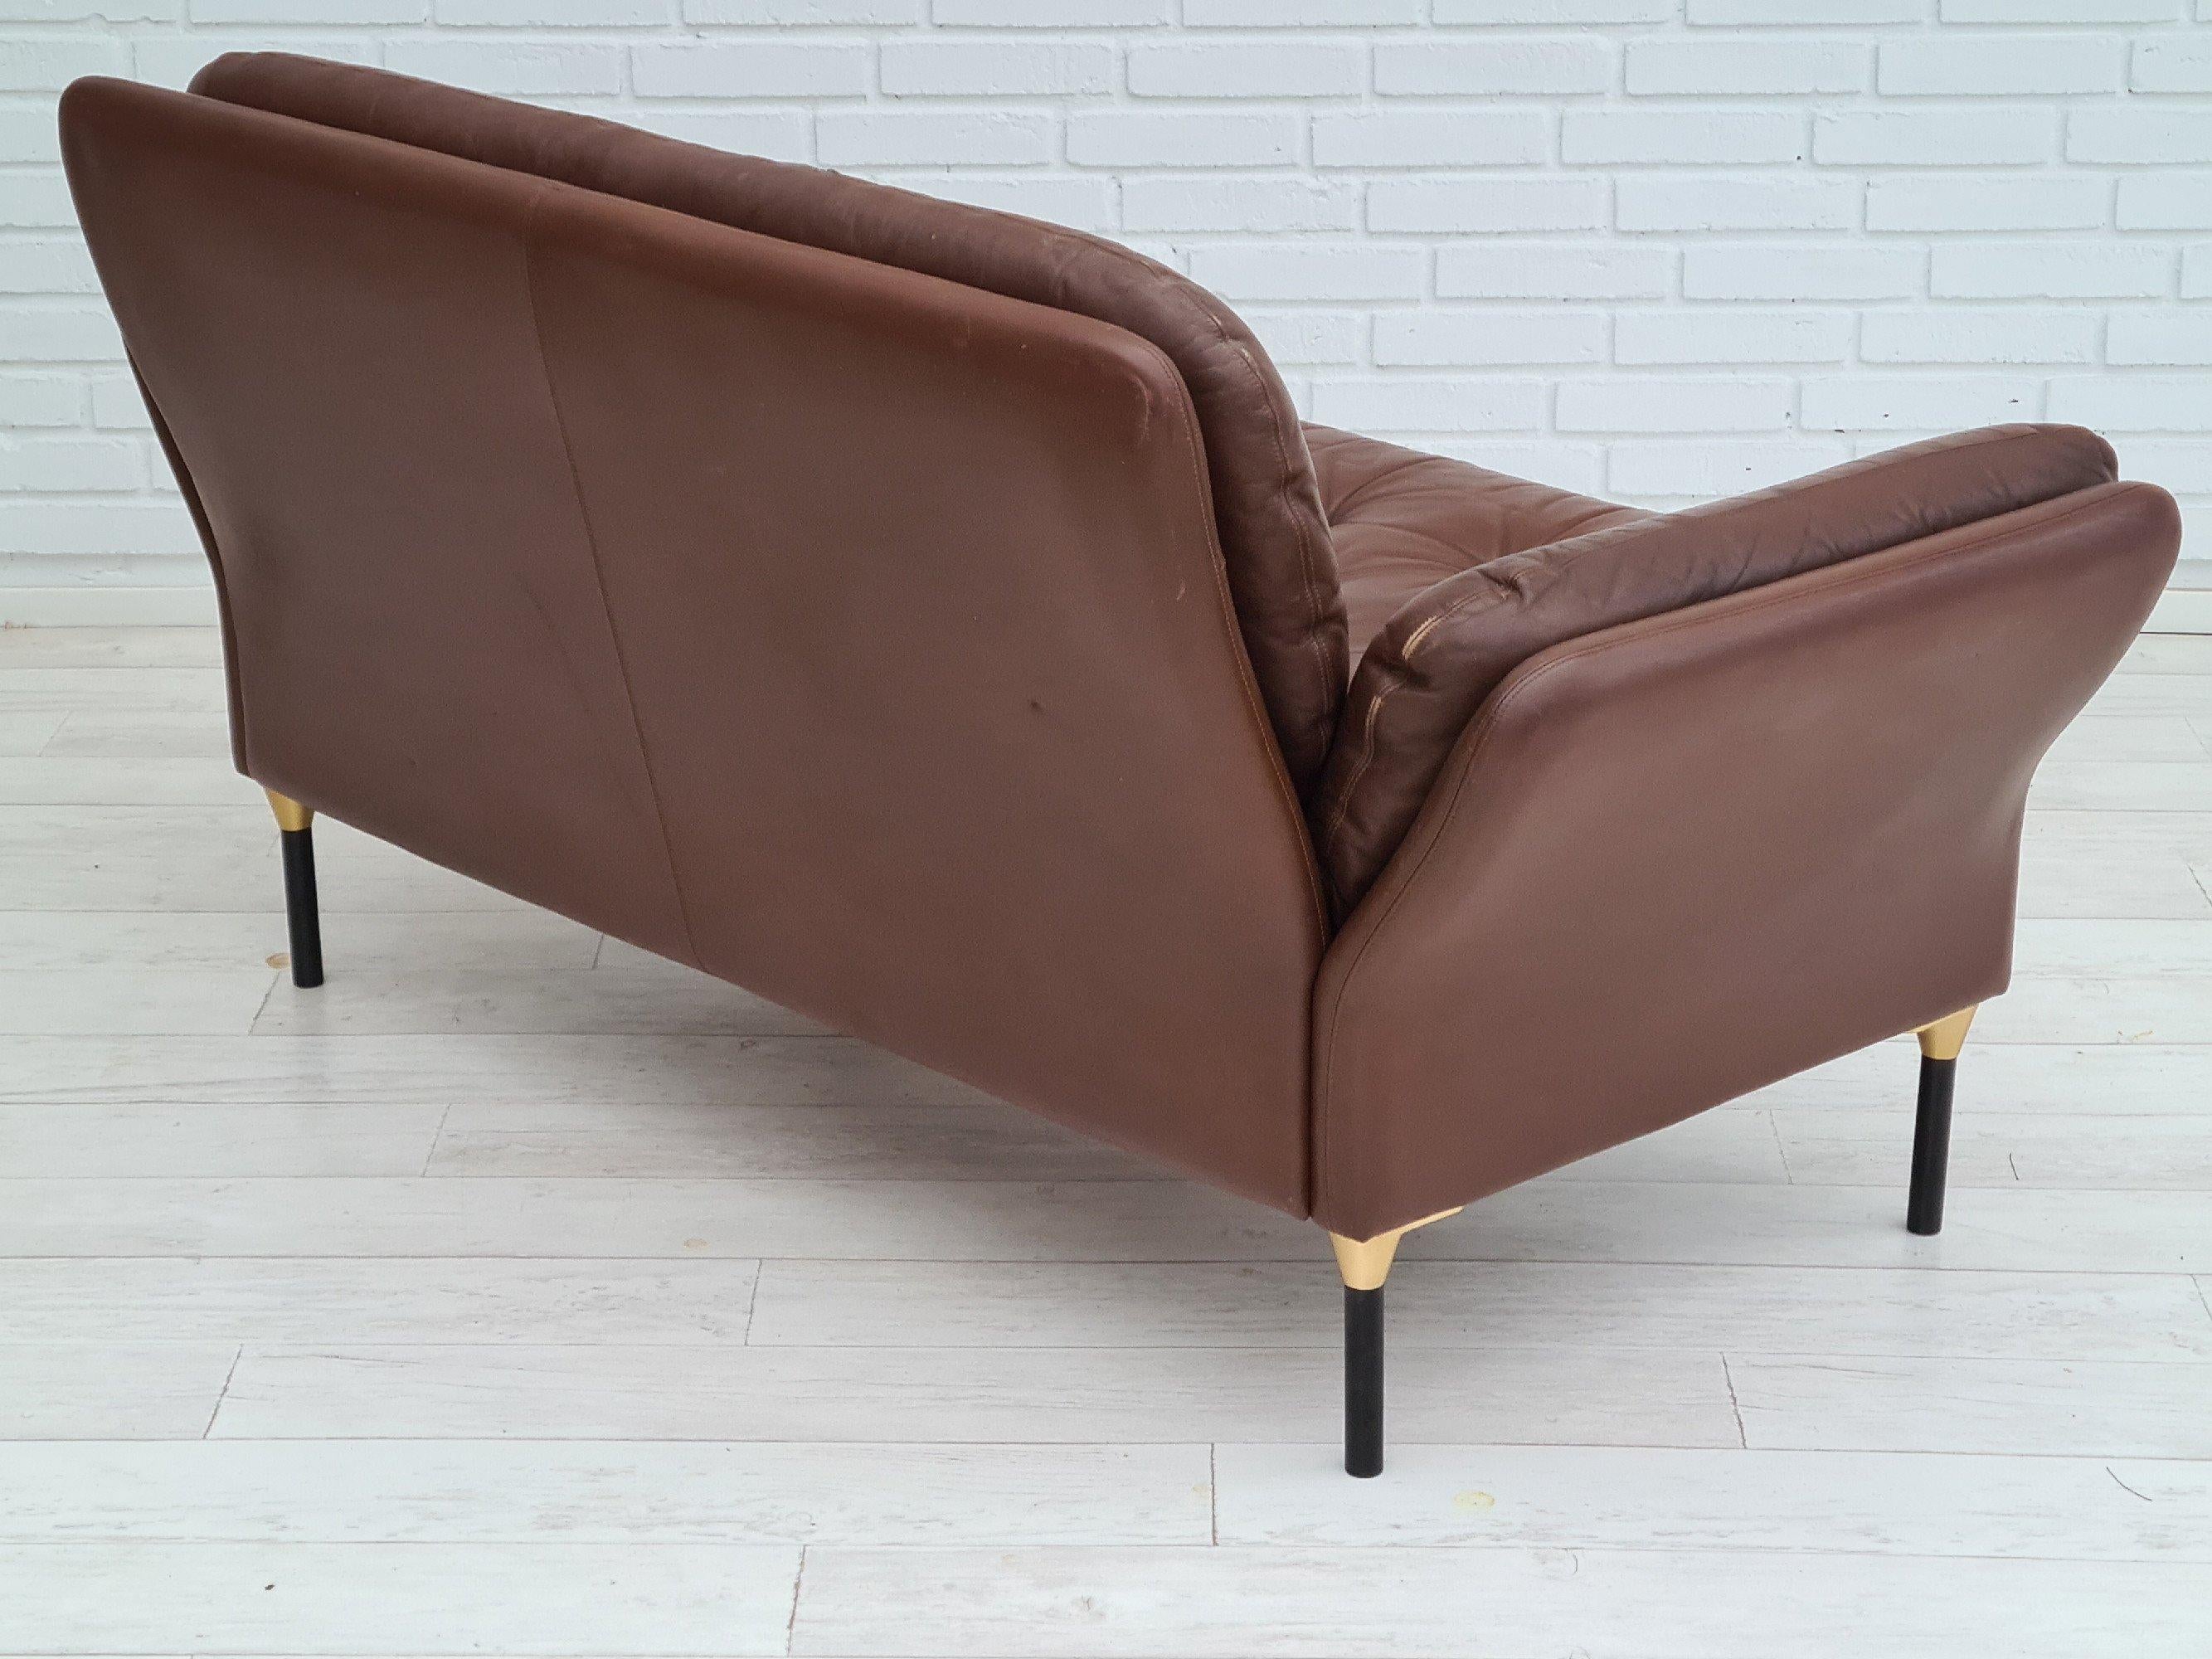 70s, Danish 2-Seater Sofa, Original Brown Leather In Good Condition For Sale In Tarm, 82